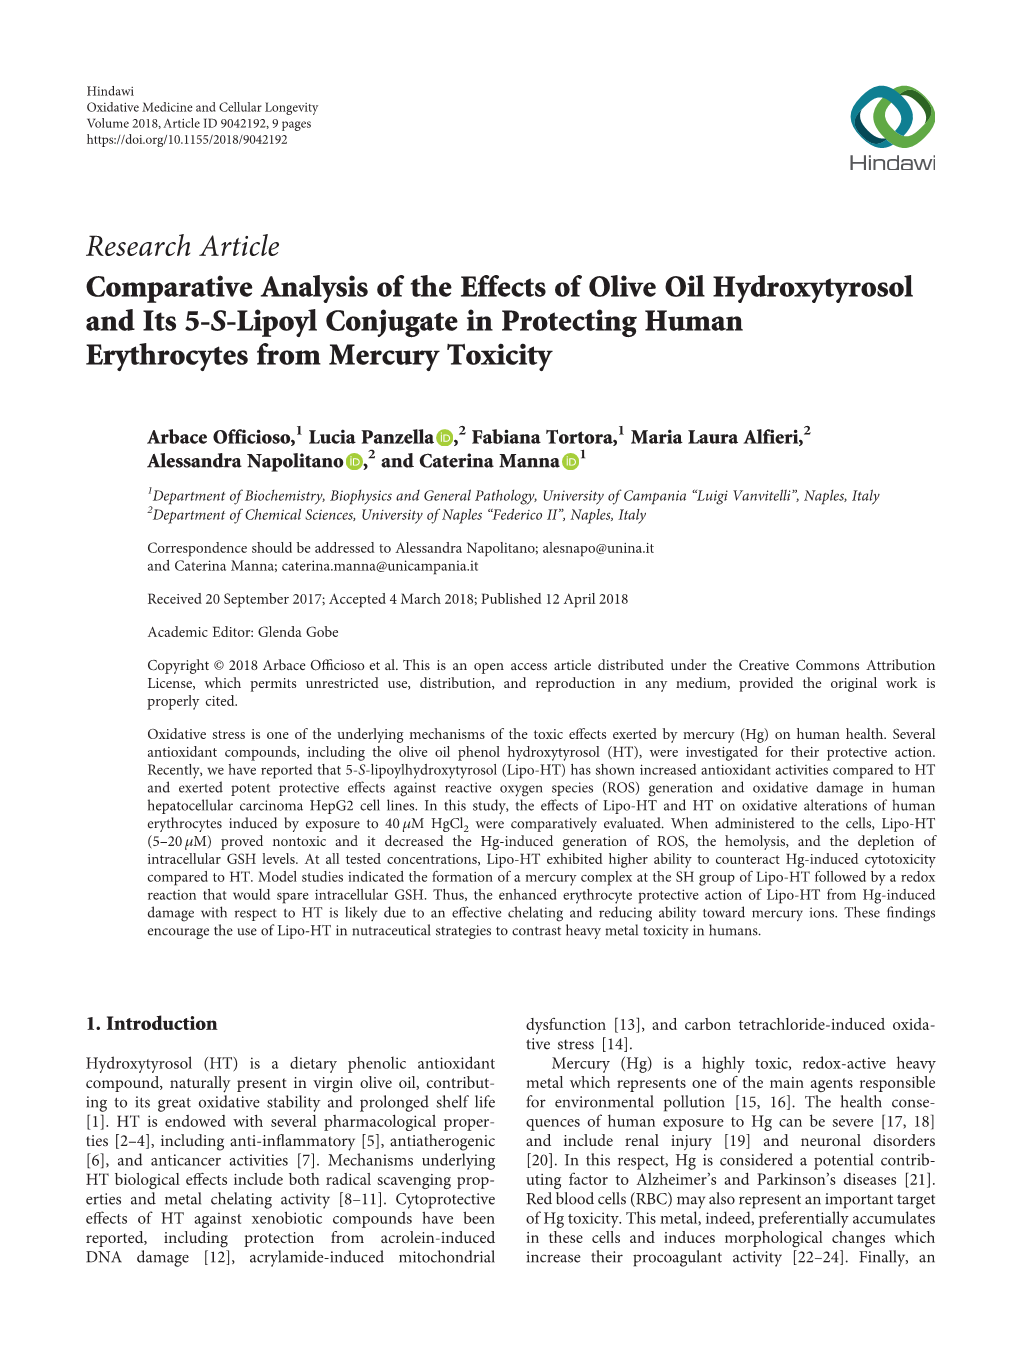 Comparative Analysis of the Effects of Olive Oil Hydroxytyrosol and Its 5-S-Lipoyl Conjugate in Protecting Human Erythrocytes from Mercury Toxicity